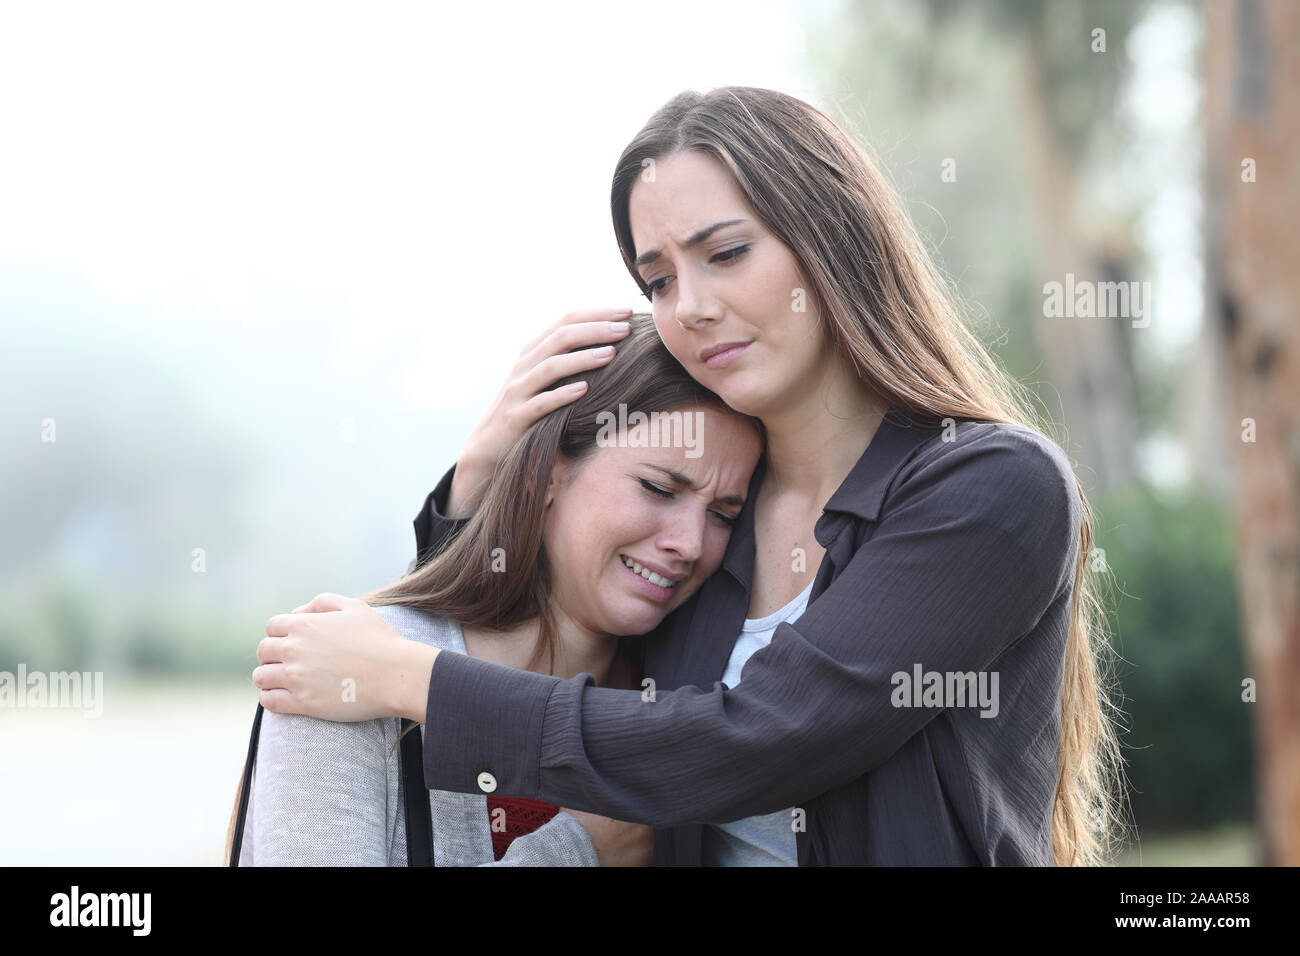 Sad woman crying and a friend comforting her standing in a park a foggy day Stock Photo